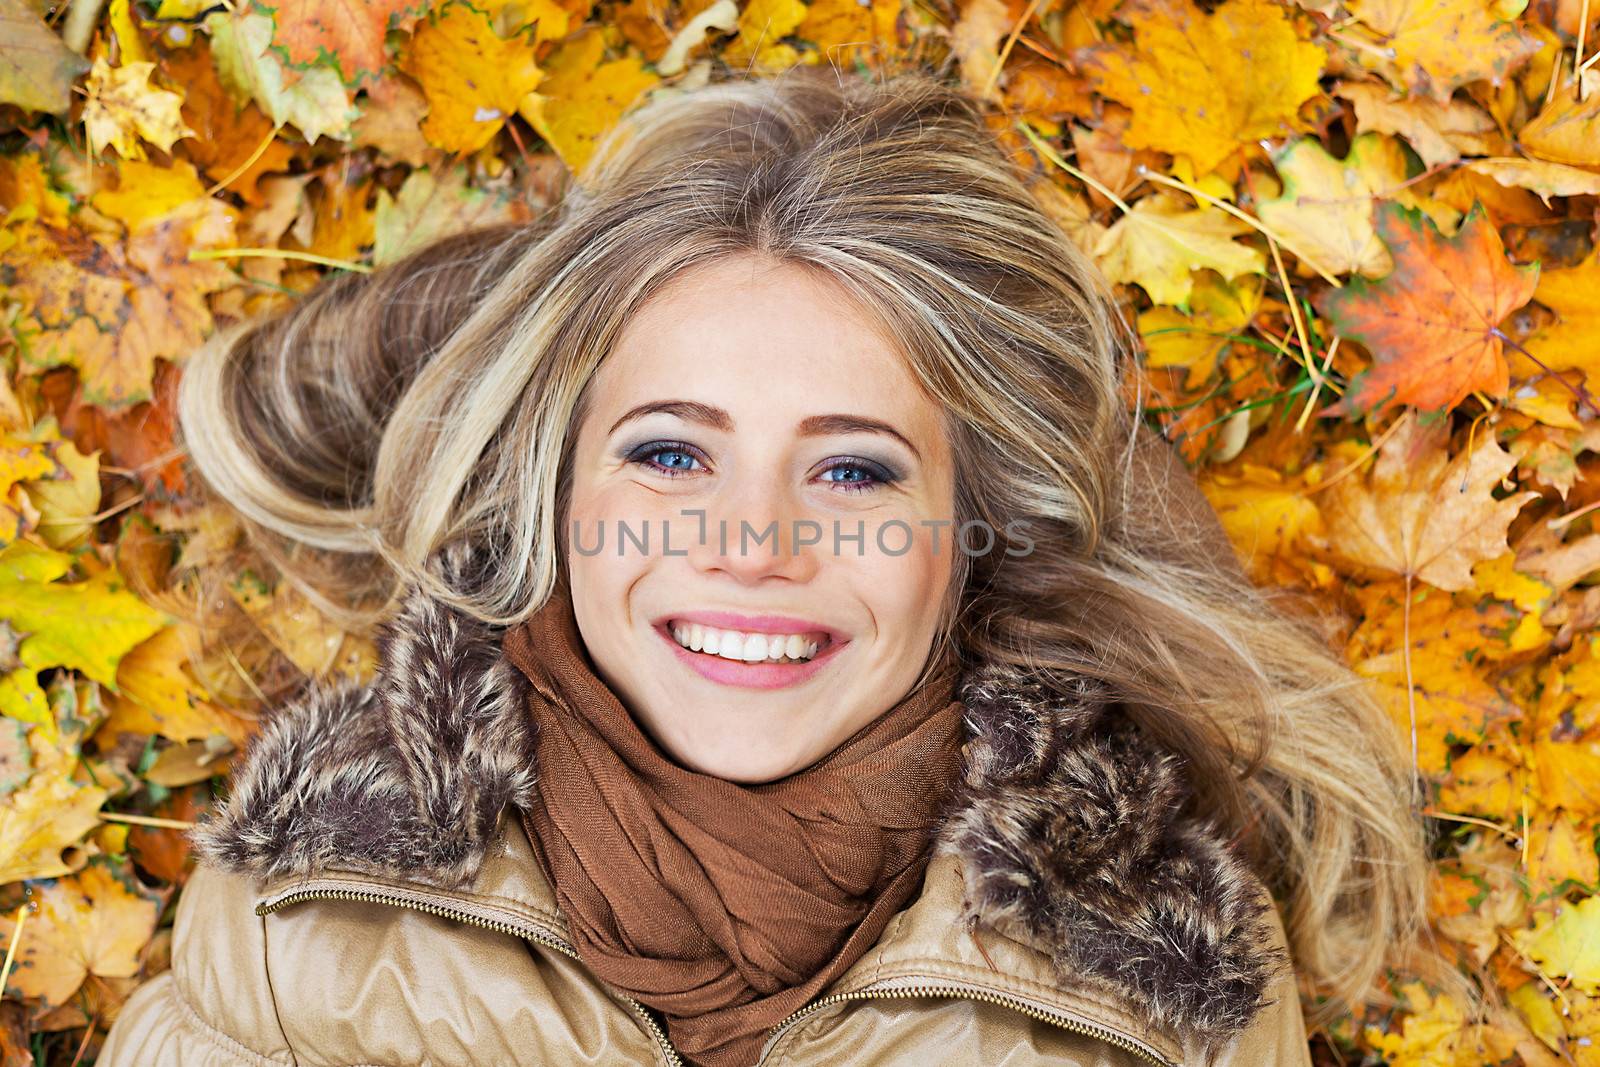 Closeup portrait of a young smiling woman surrounded by autumn leaves